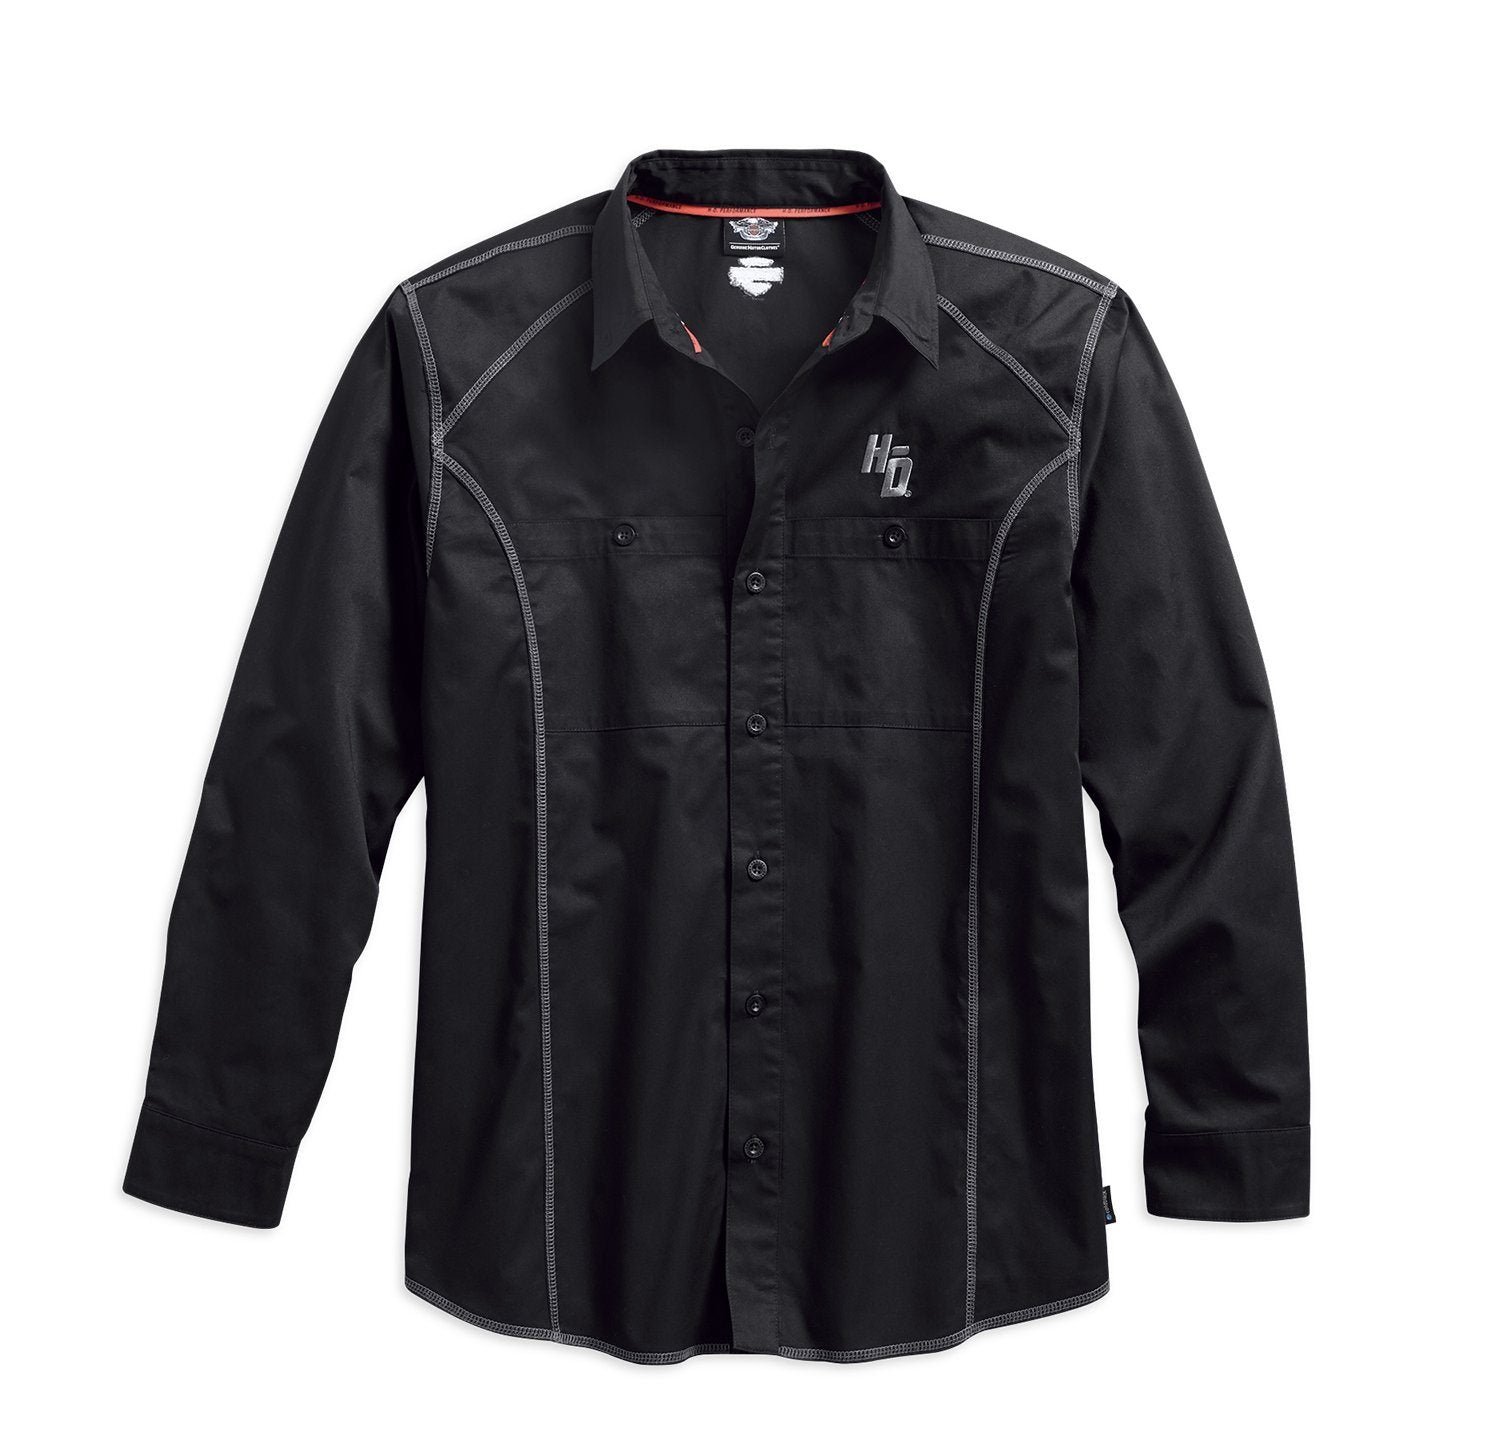 Elevated Performance Menswear  Button-Up Long-Sleeve Shirt